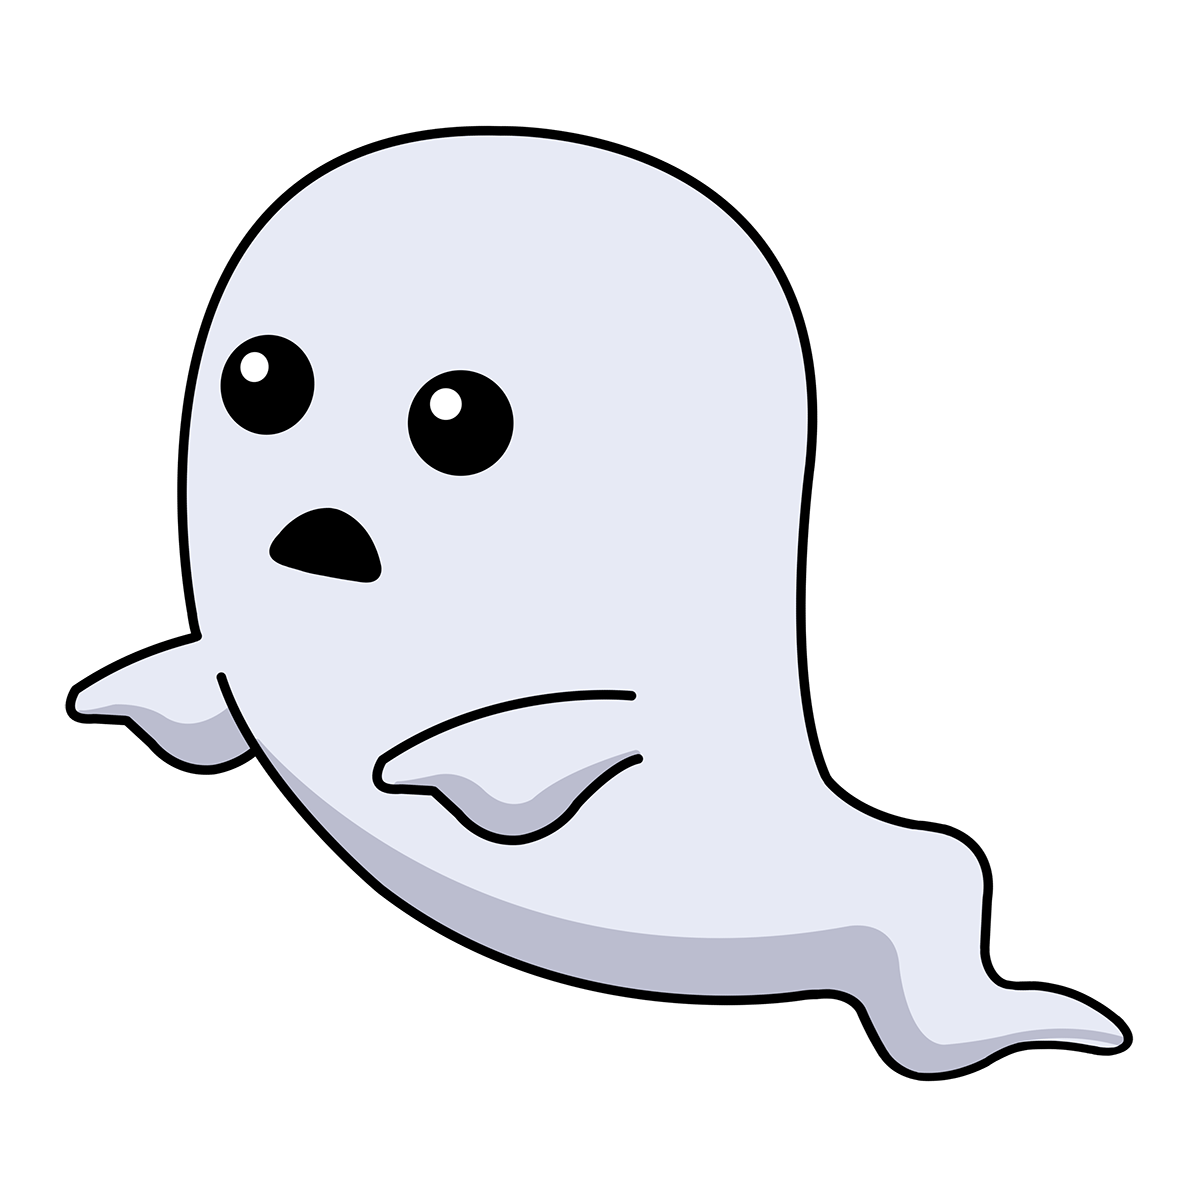 An important theme in. Clipart ghost supernatural